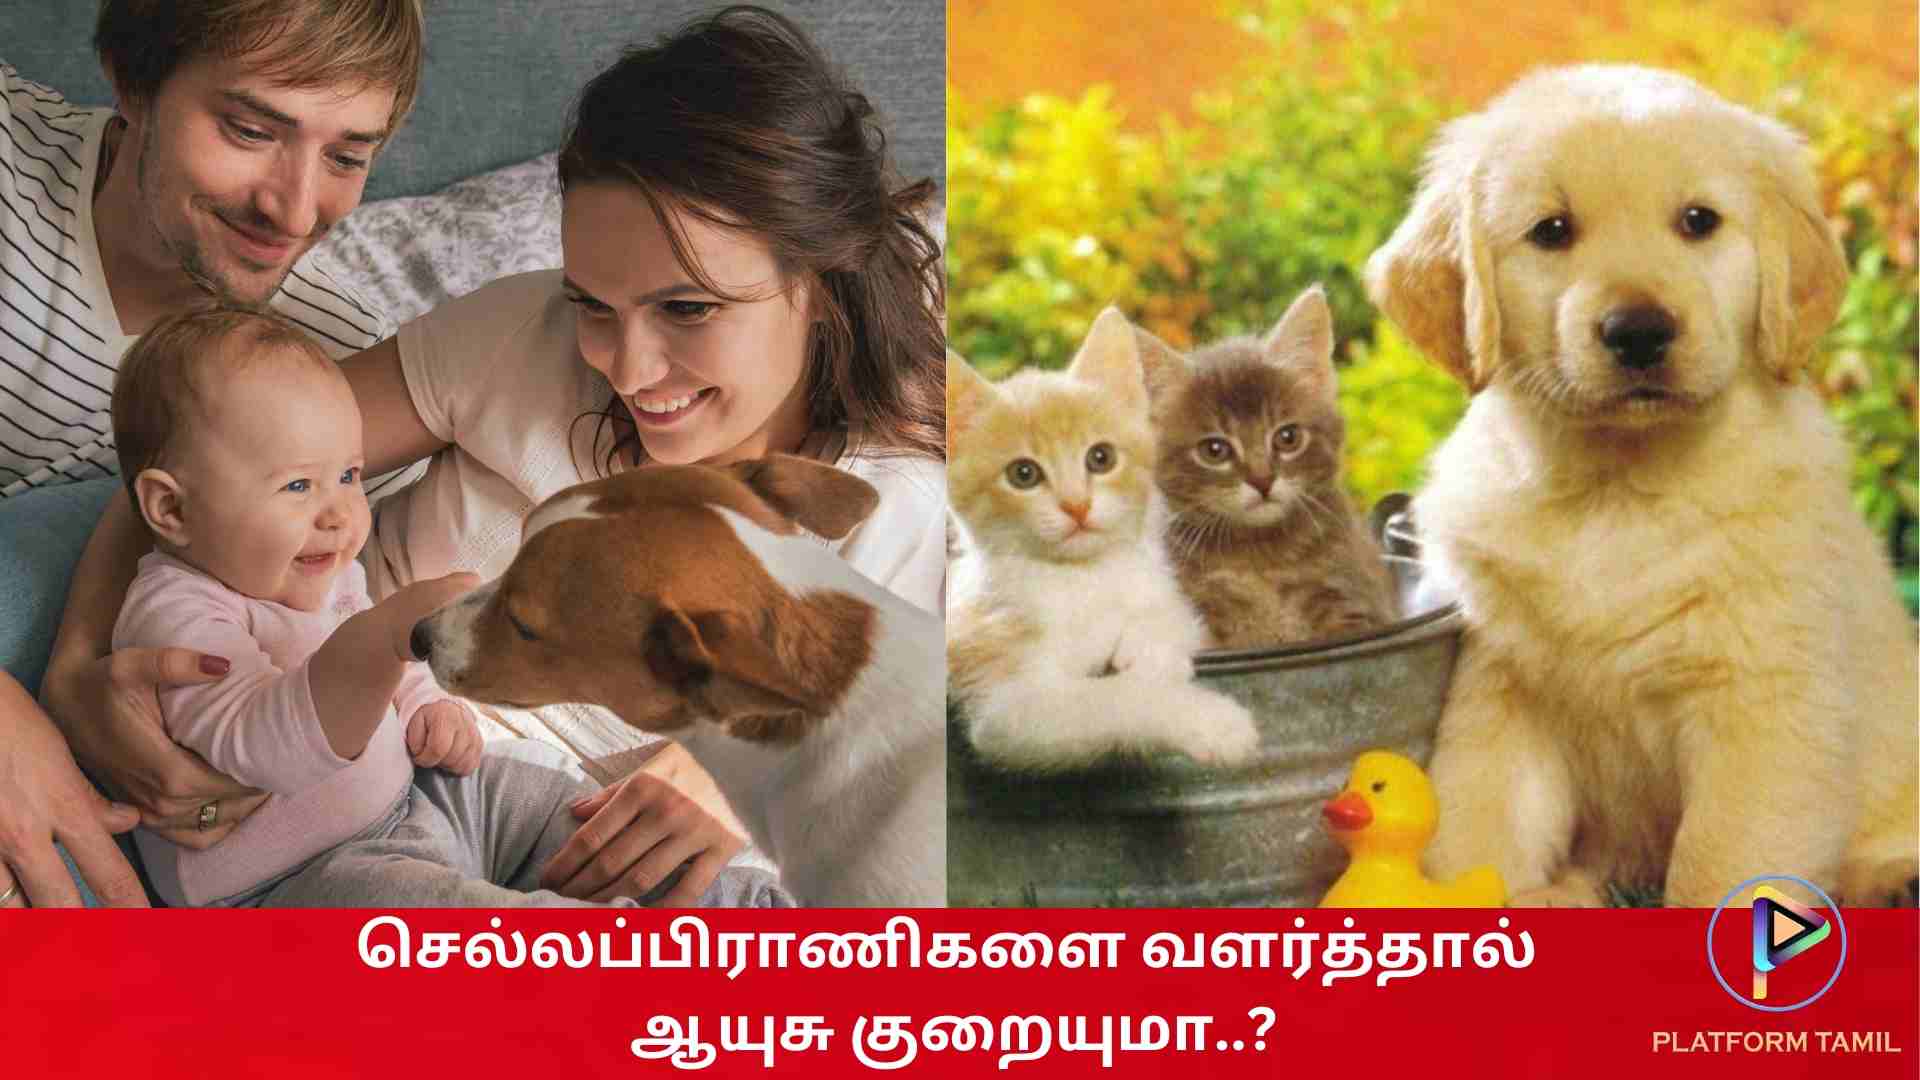 Problems For Pet Owners - Platform Tamil